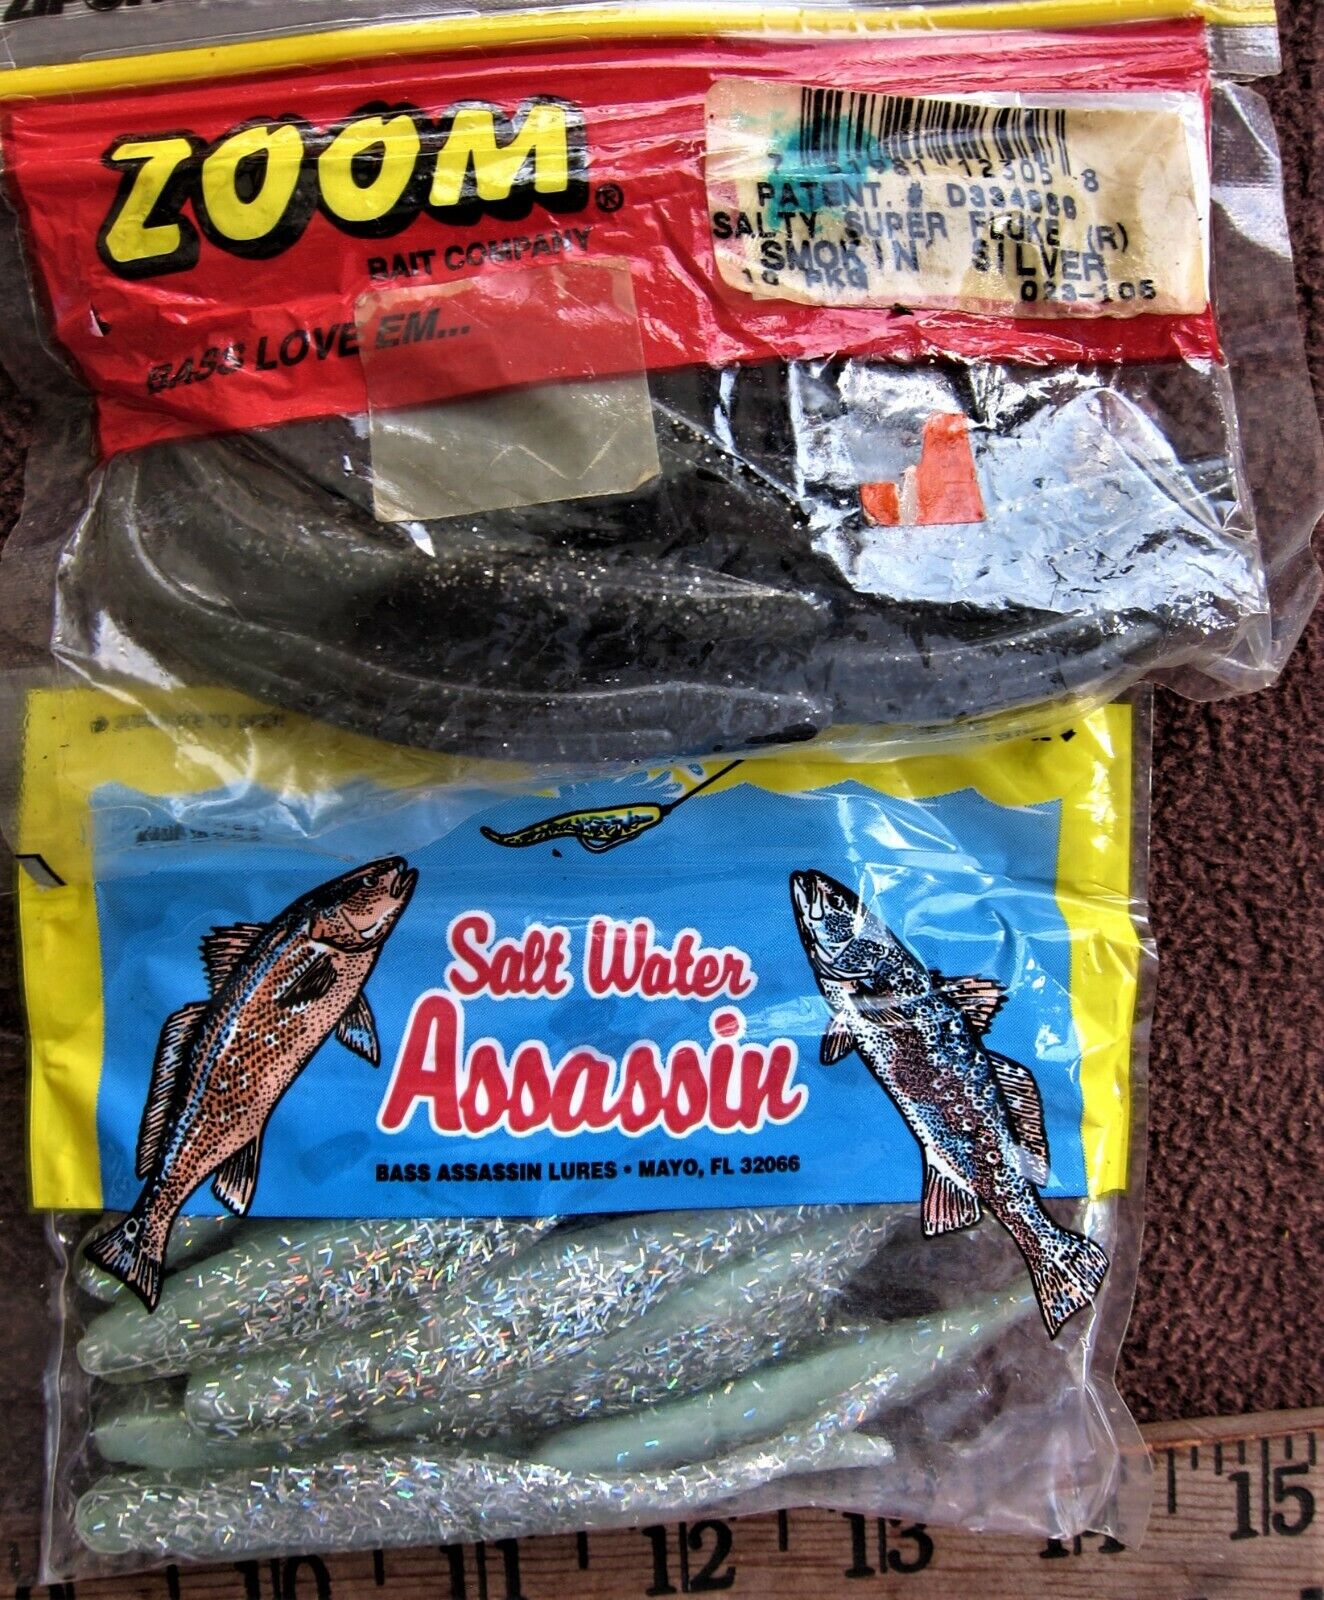 Lot of 4 Packages Scented Plastic Baits: DOA, GAMBLER, ZOOM, BASS ASSASSIN  - NEW